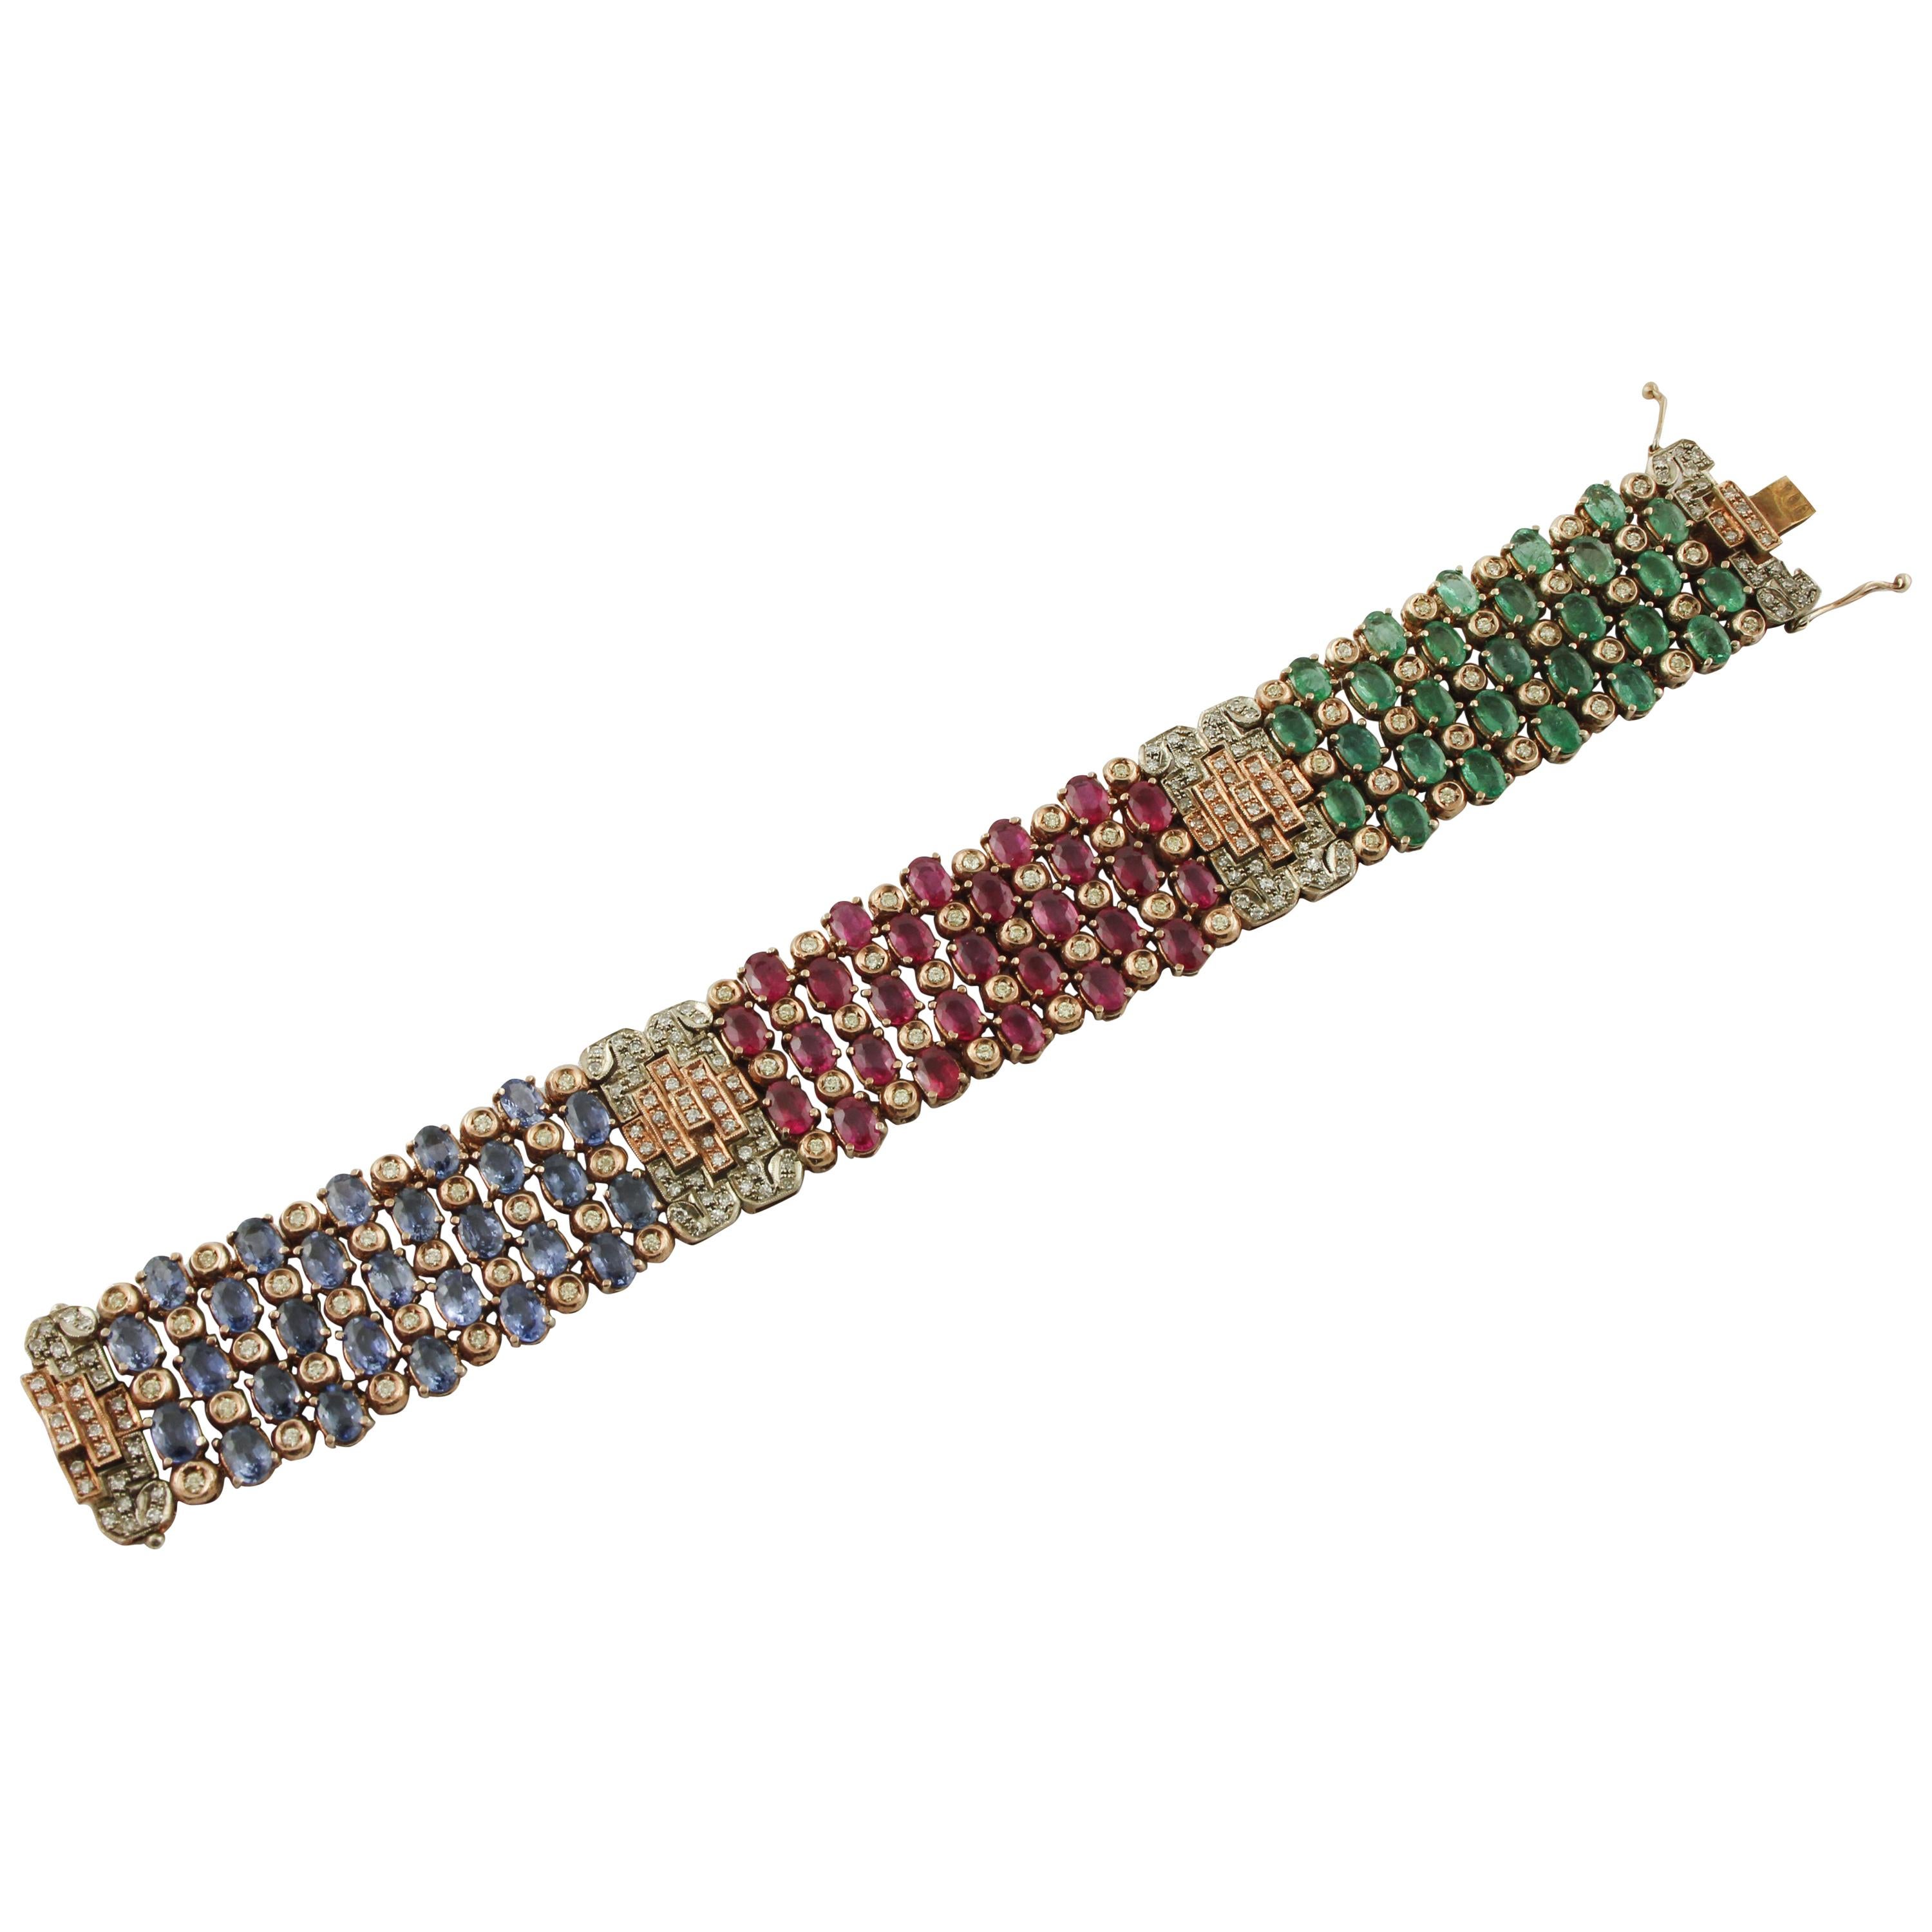 45.30 ct Rubies, Emeralds, Sapphires, 4.95 ct Diamonds Rose Gold Silver Bracelet For Sale